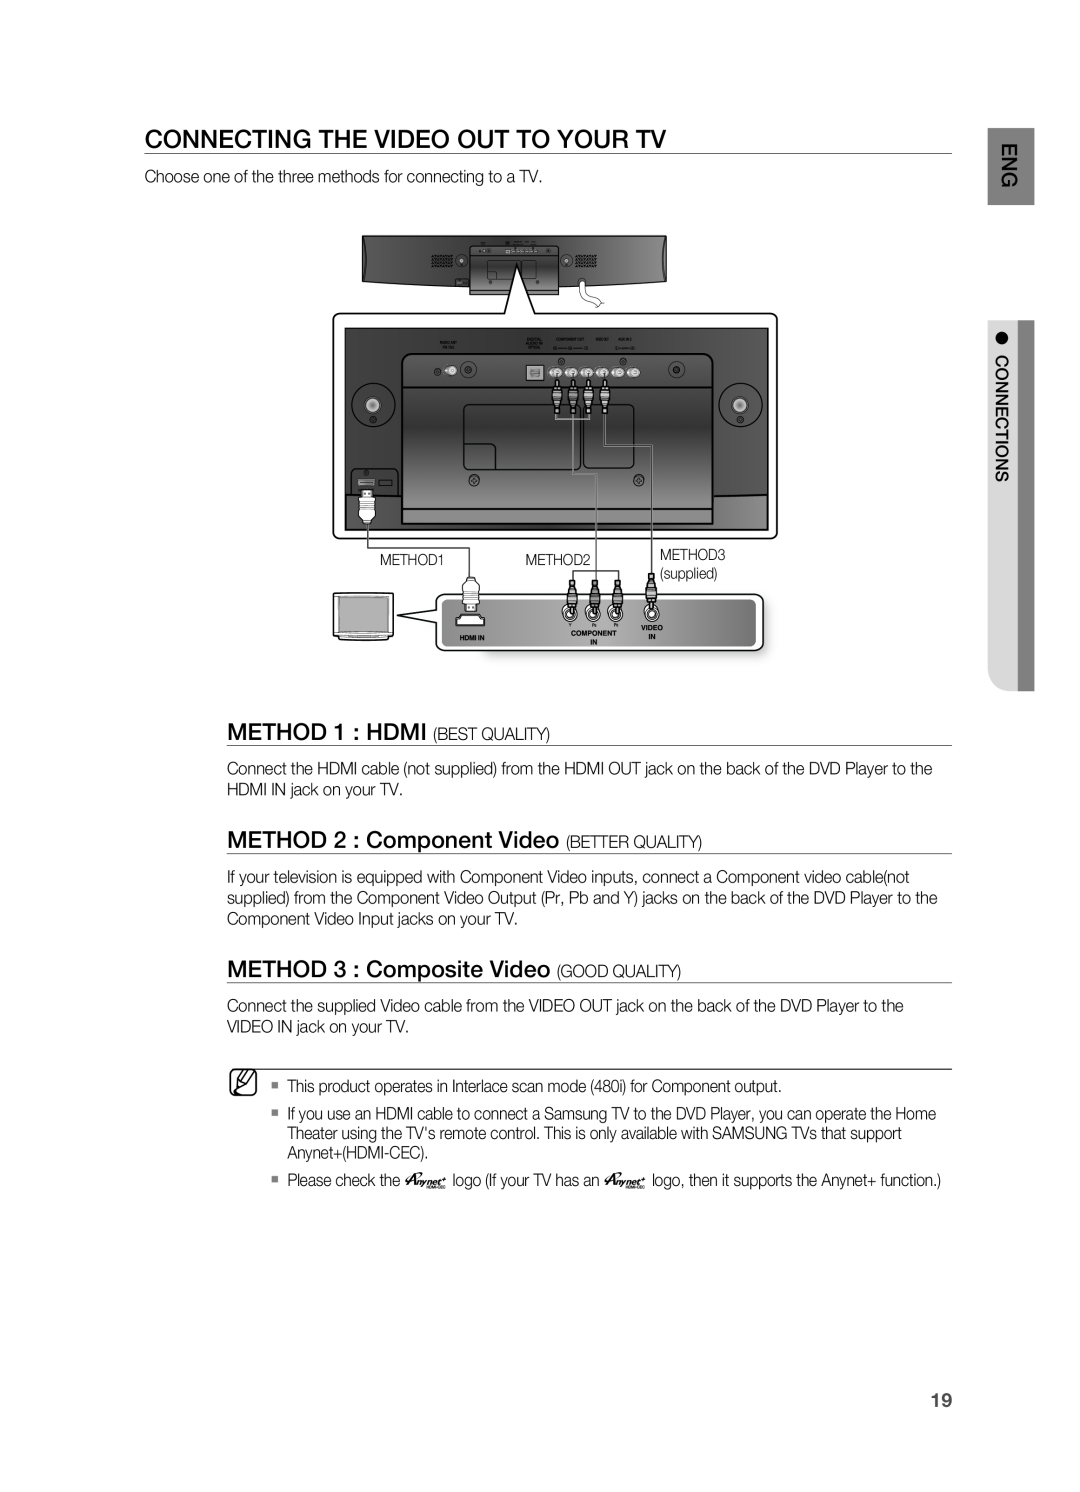 Sony HT-X810 CONNECTING THE VIDEO OUT TO YOUr TV, METHOD 1 HDMI BEST QUALITY, METHOD 2 Component Video BETTER QUALITY 